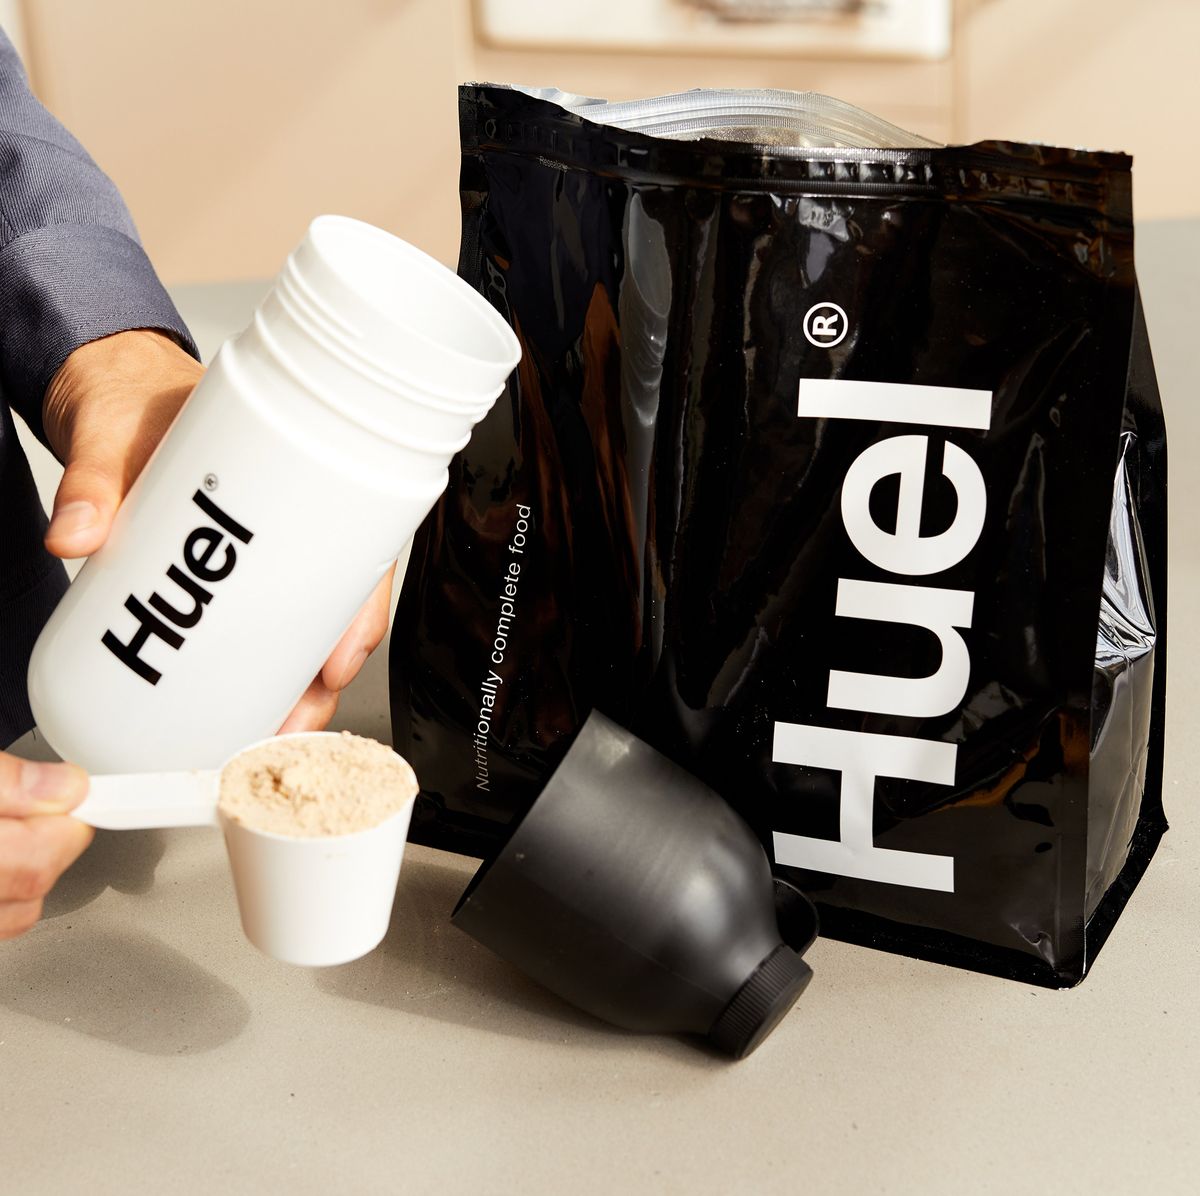 Huel - Black Edition just got better ☕ We love adding coffee to our Huel  and Black Edition is no exception 🙌 but our new flavour takes Huel and  coffee to the